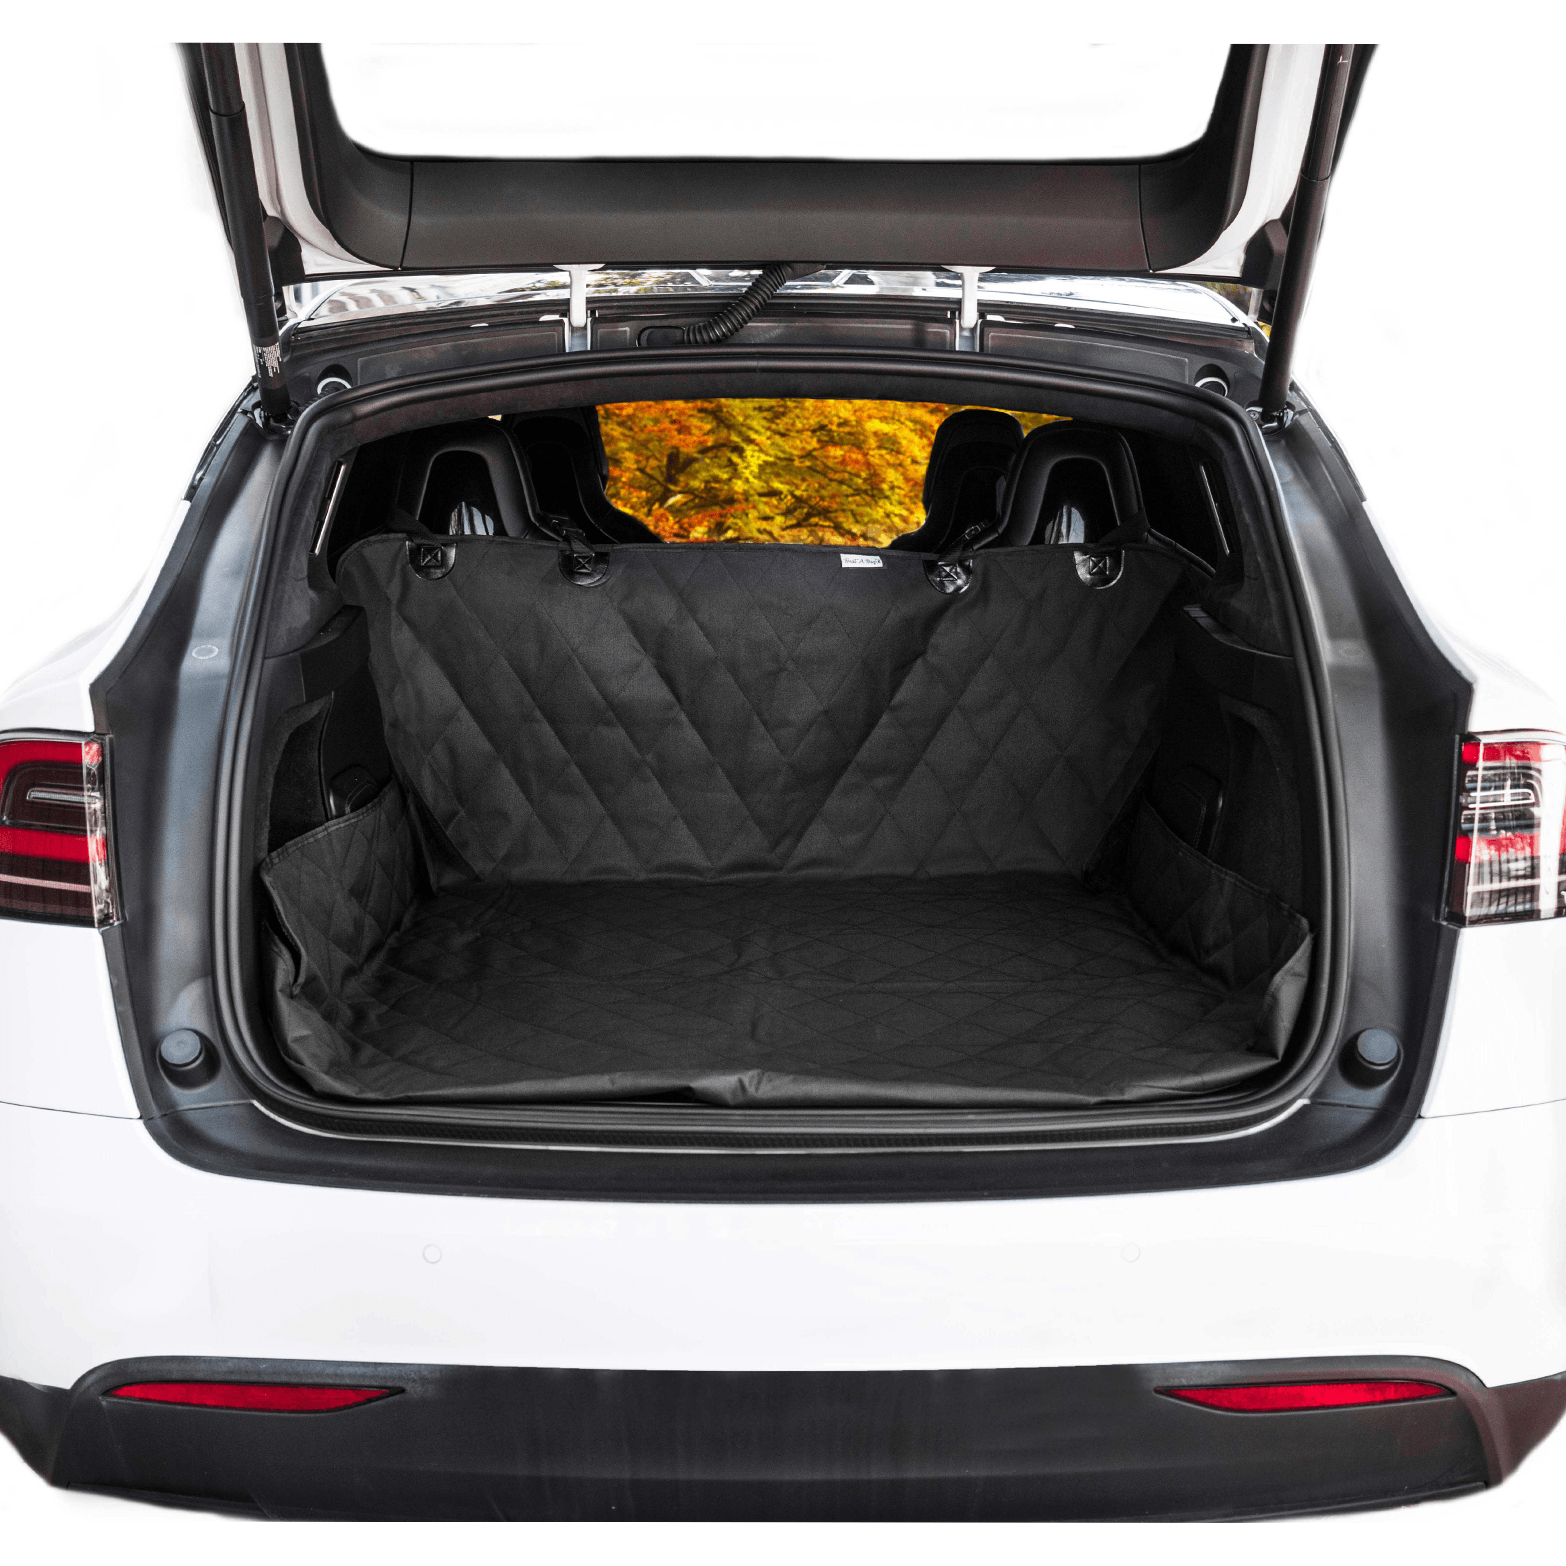 PupProtector™ Cargo Liner Cover for SUVs & Cars - Waterproof –